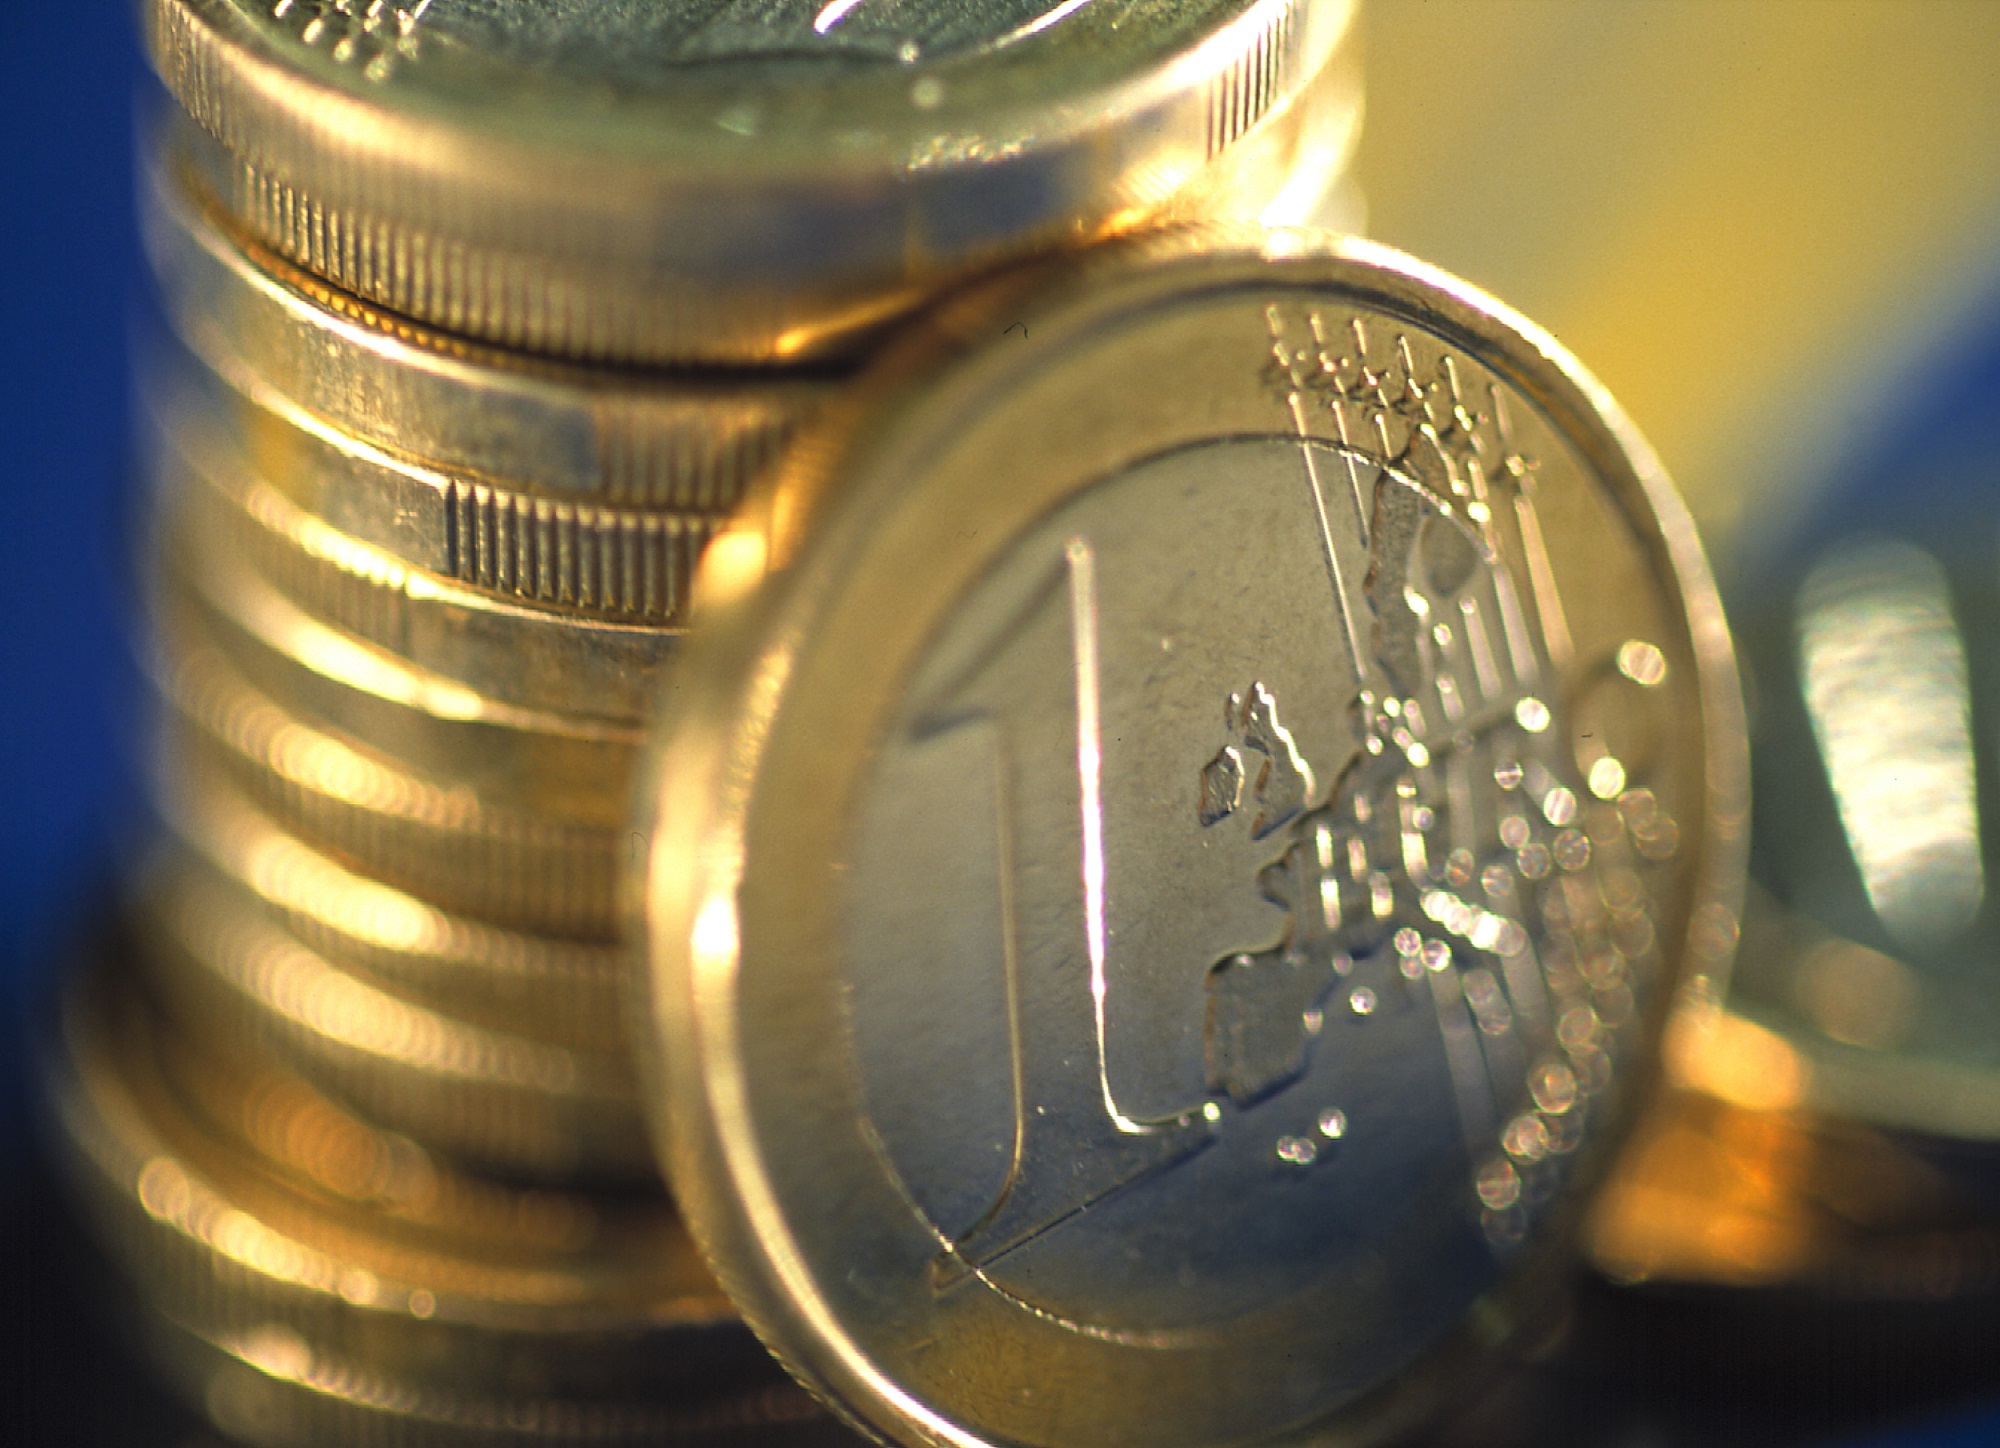 Image of 1 euro coin (by ACN)